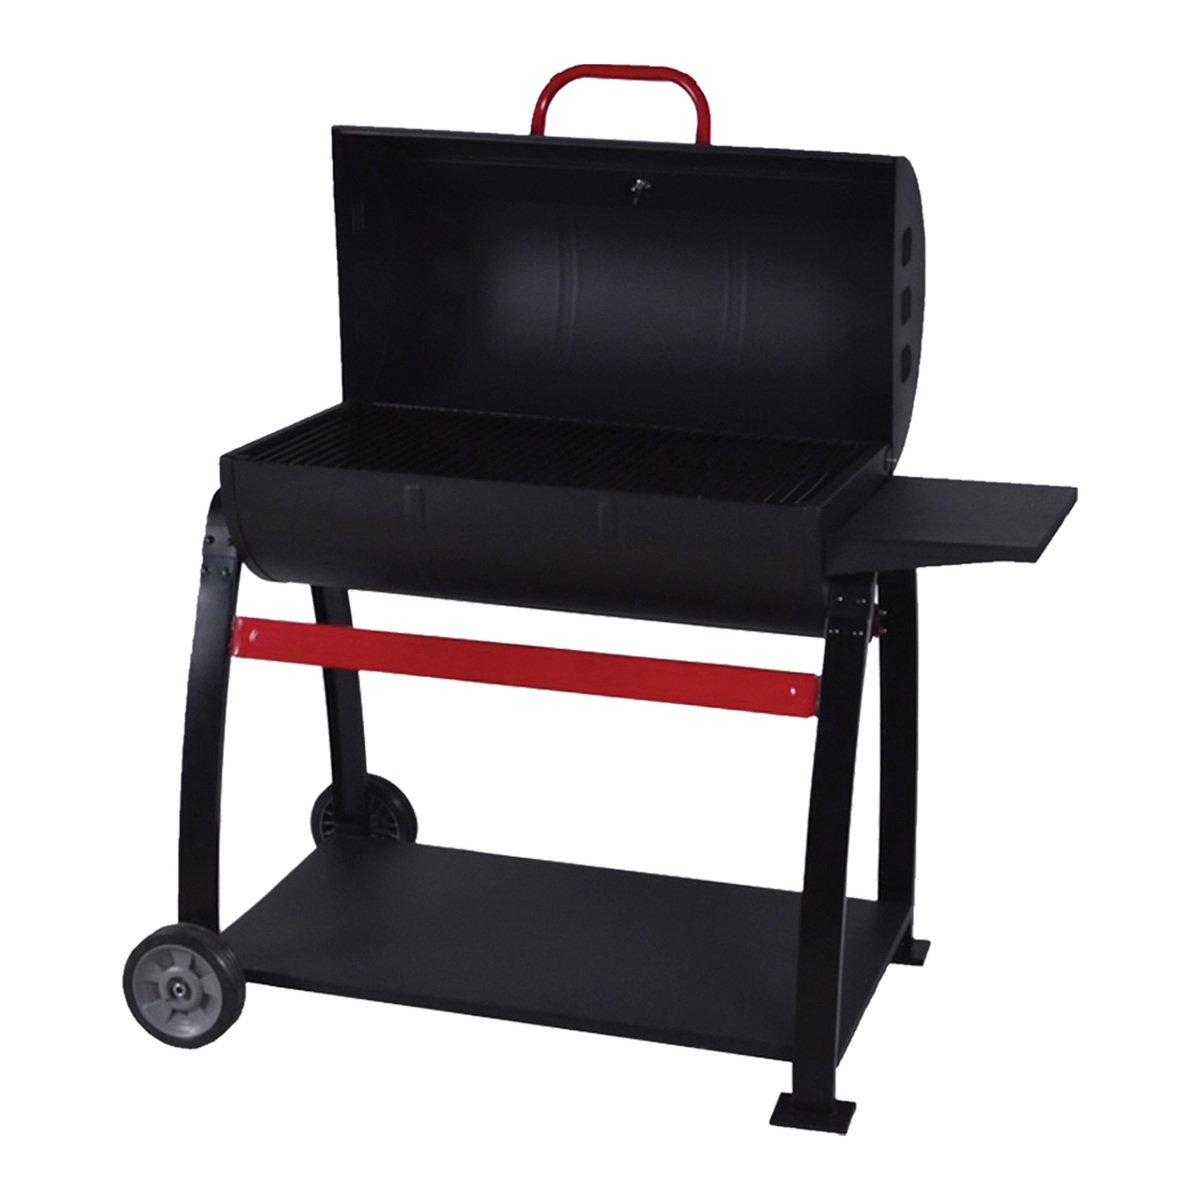 RELAX BBQ Grill KY838AR 77cm